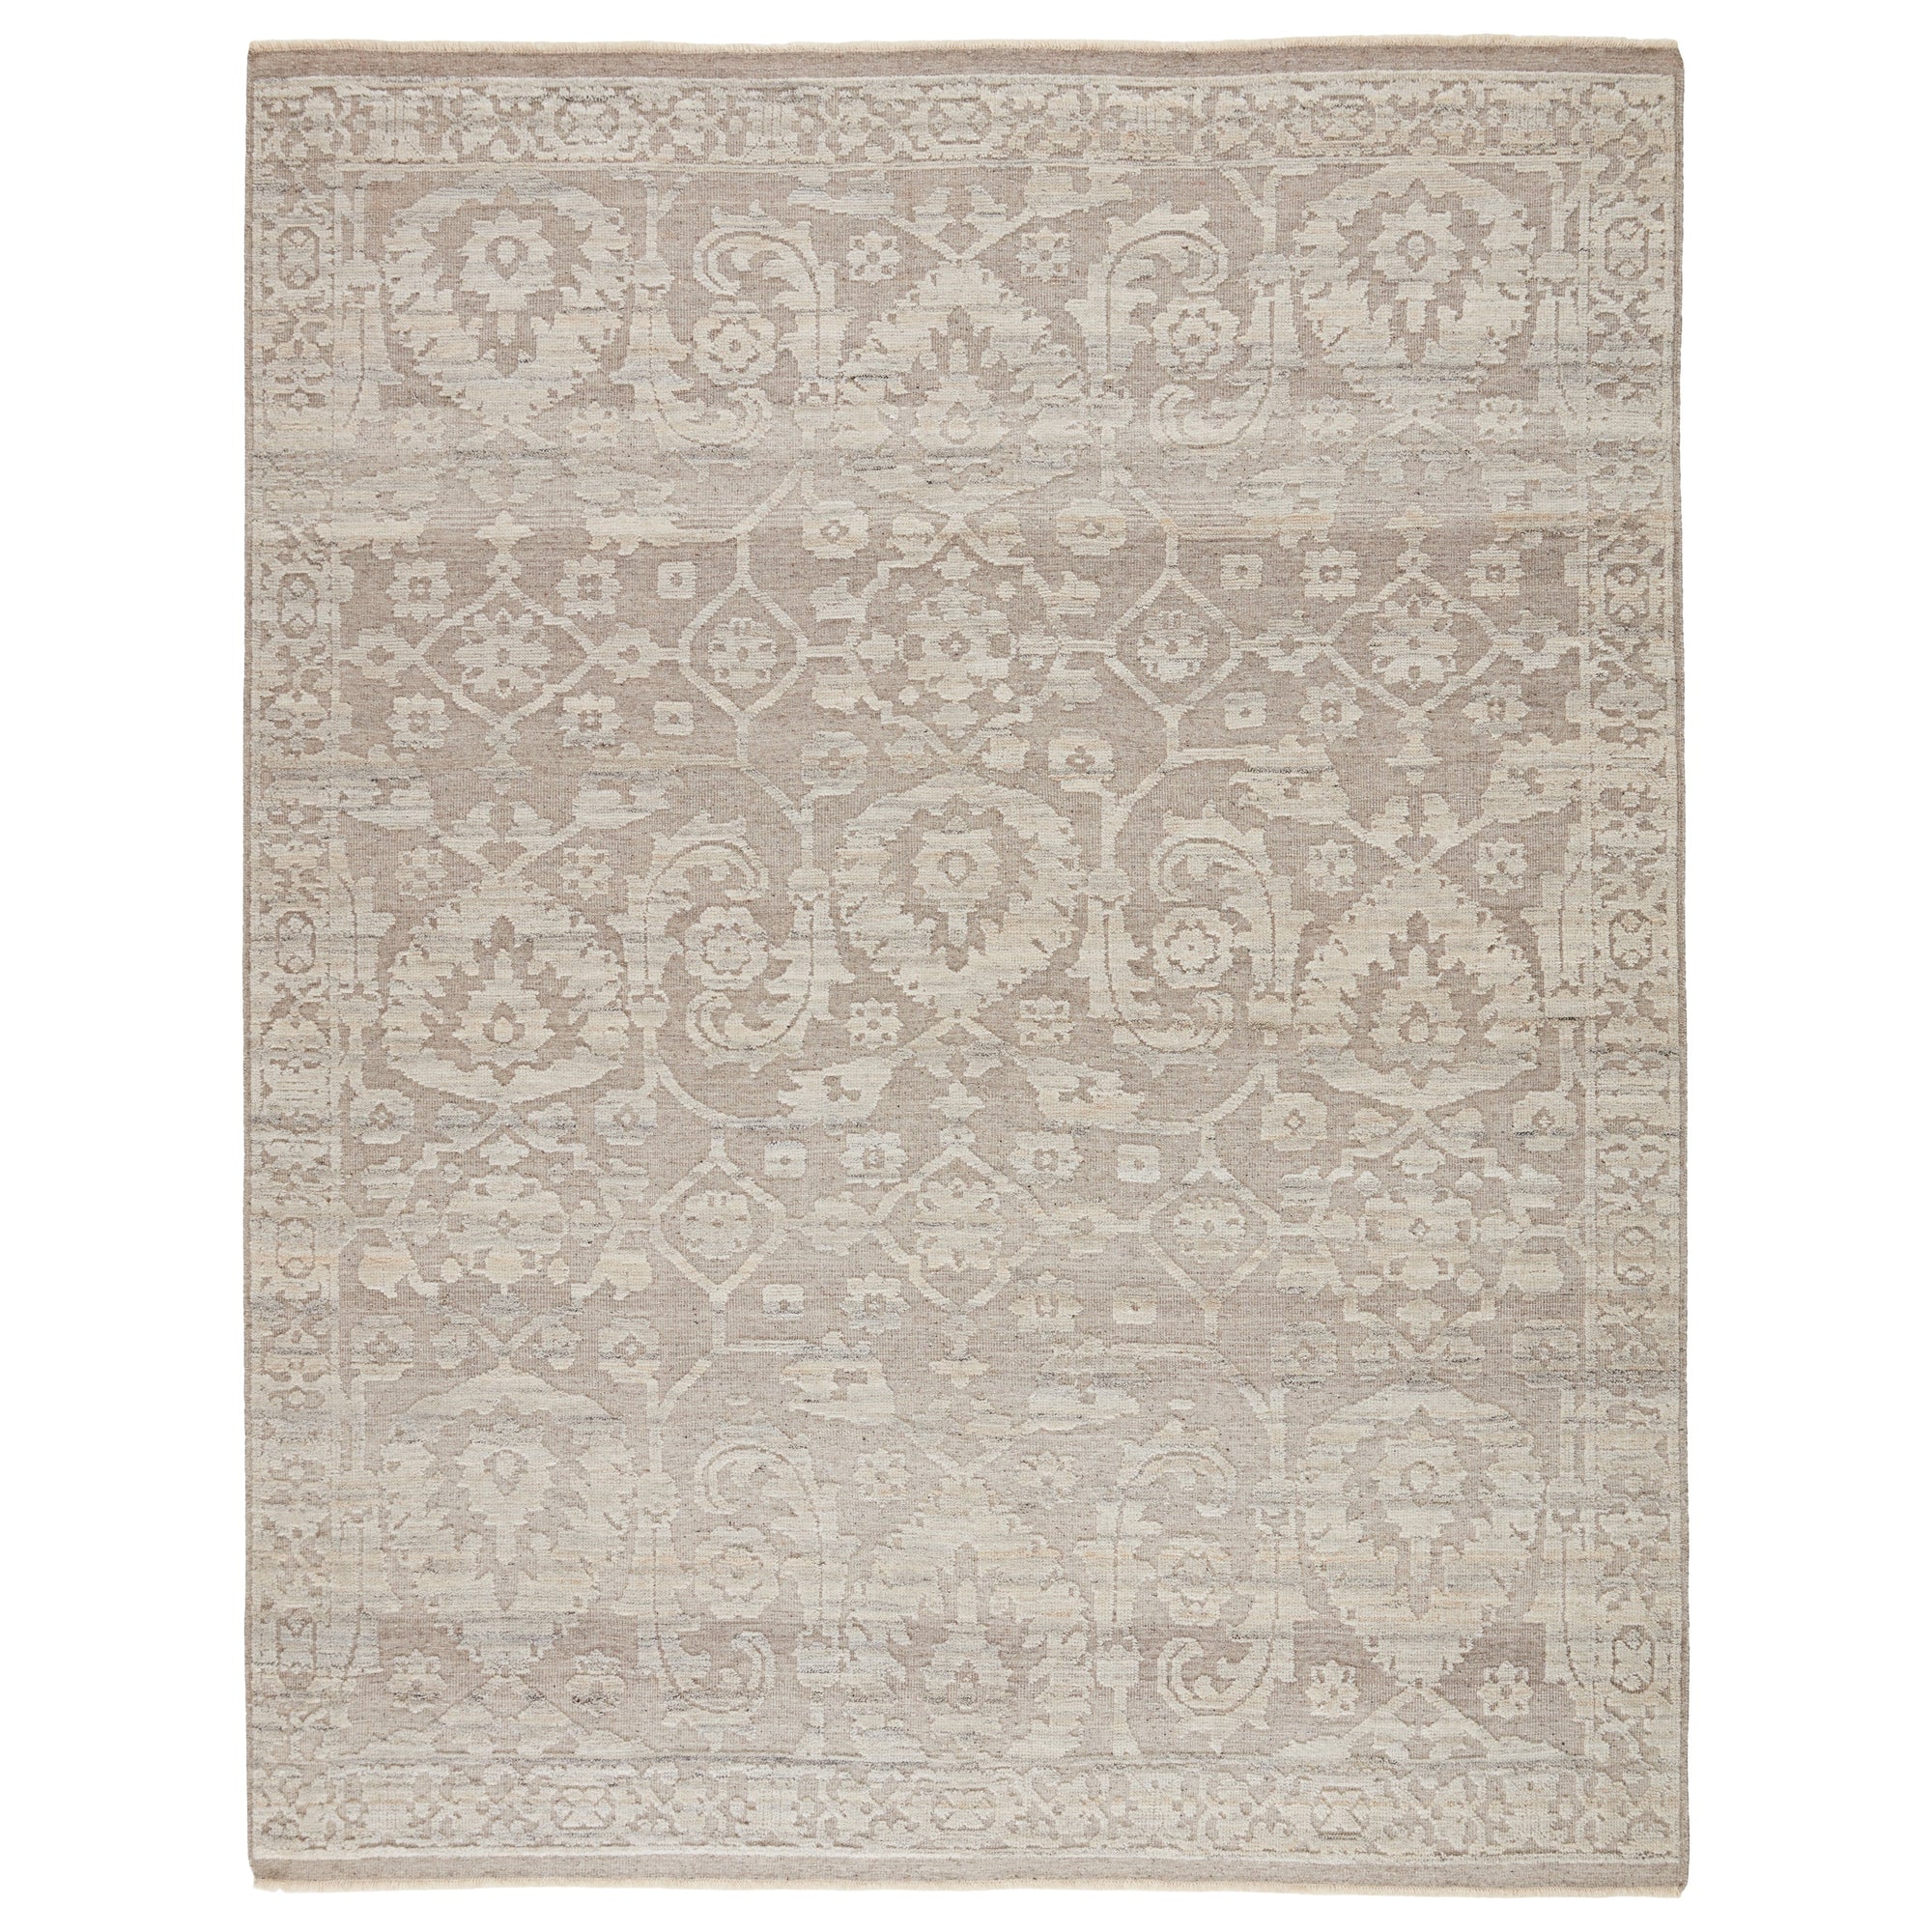 Rugs by Roo | Jaipur Living Ayres Hand-Knotted Floral Taupe Gray Area Rug-RUG146562